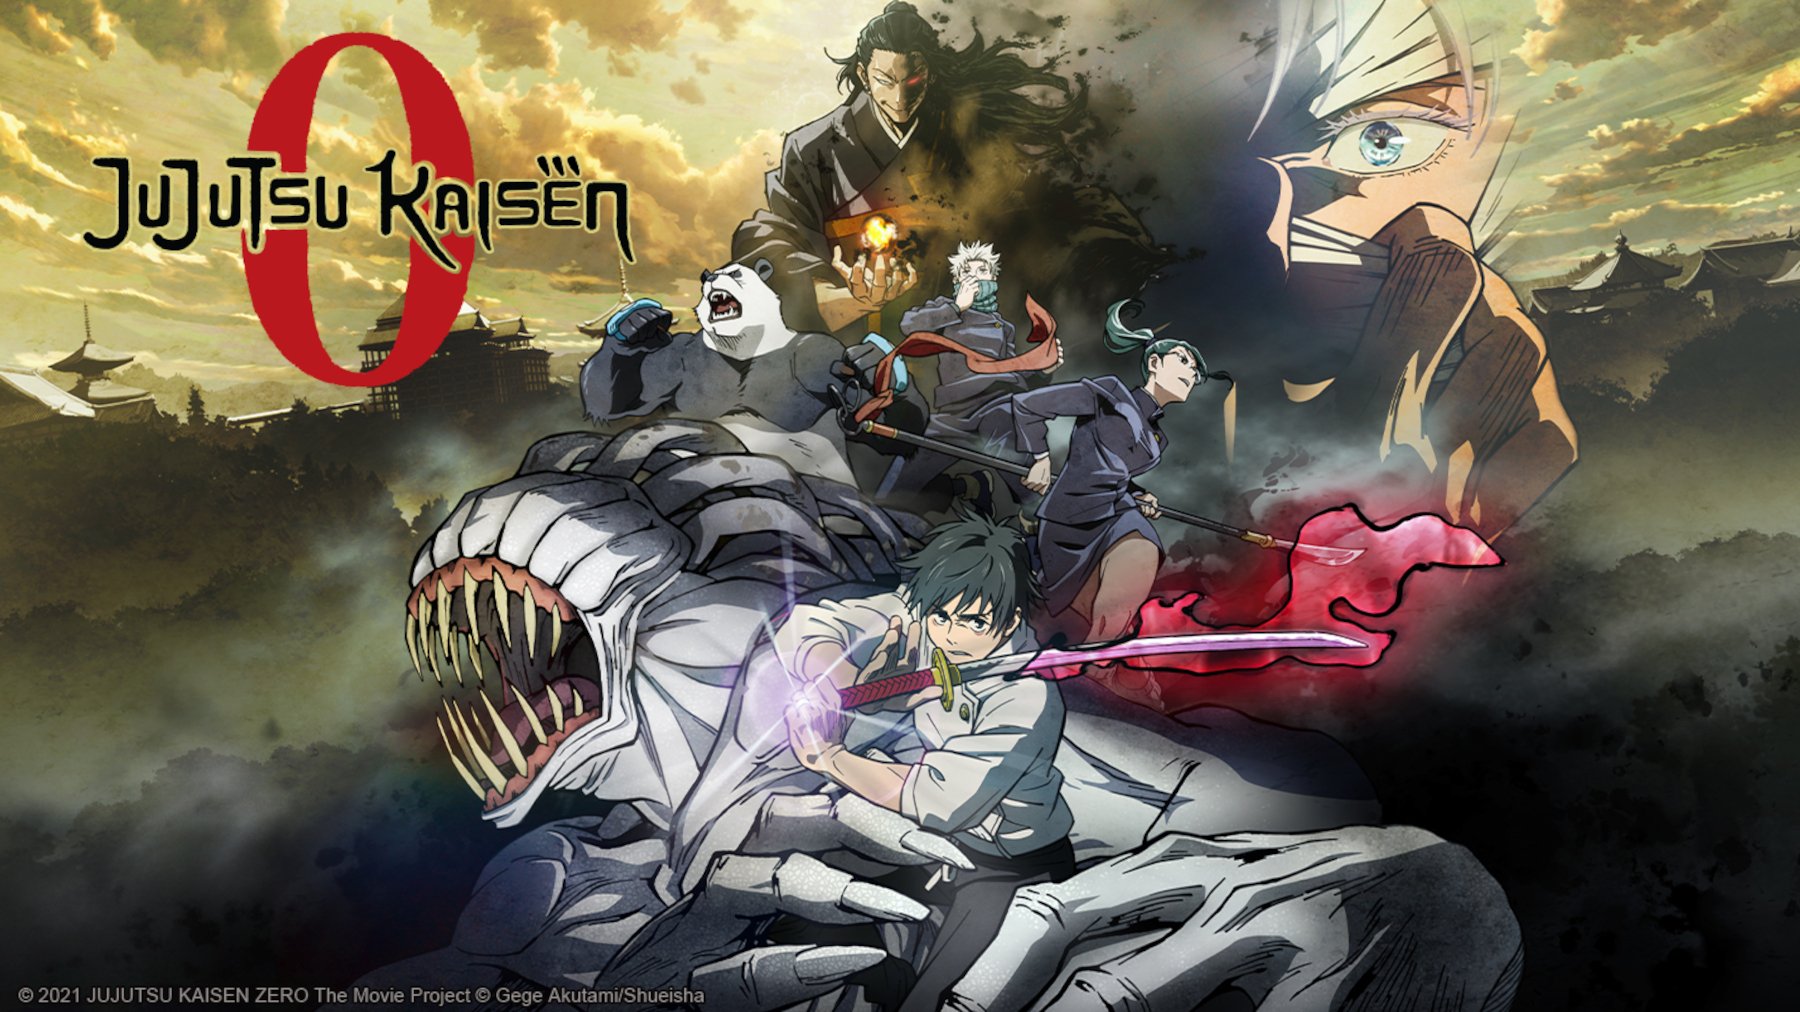 Key art for 'Jujutsu Kaisen 0.' It features Yuta, Rika, Gojo, and the supporting characters from the film.